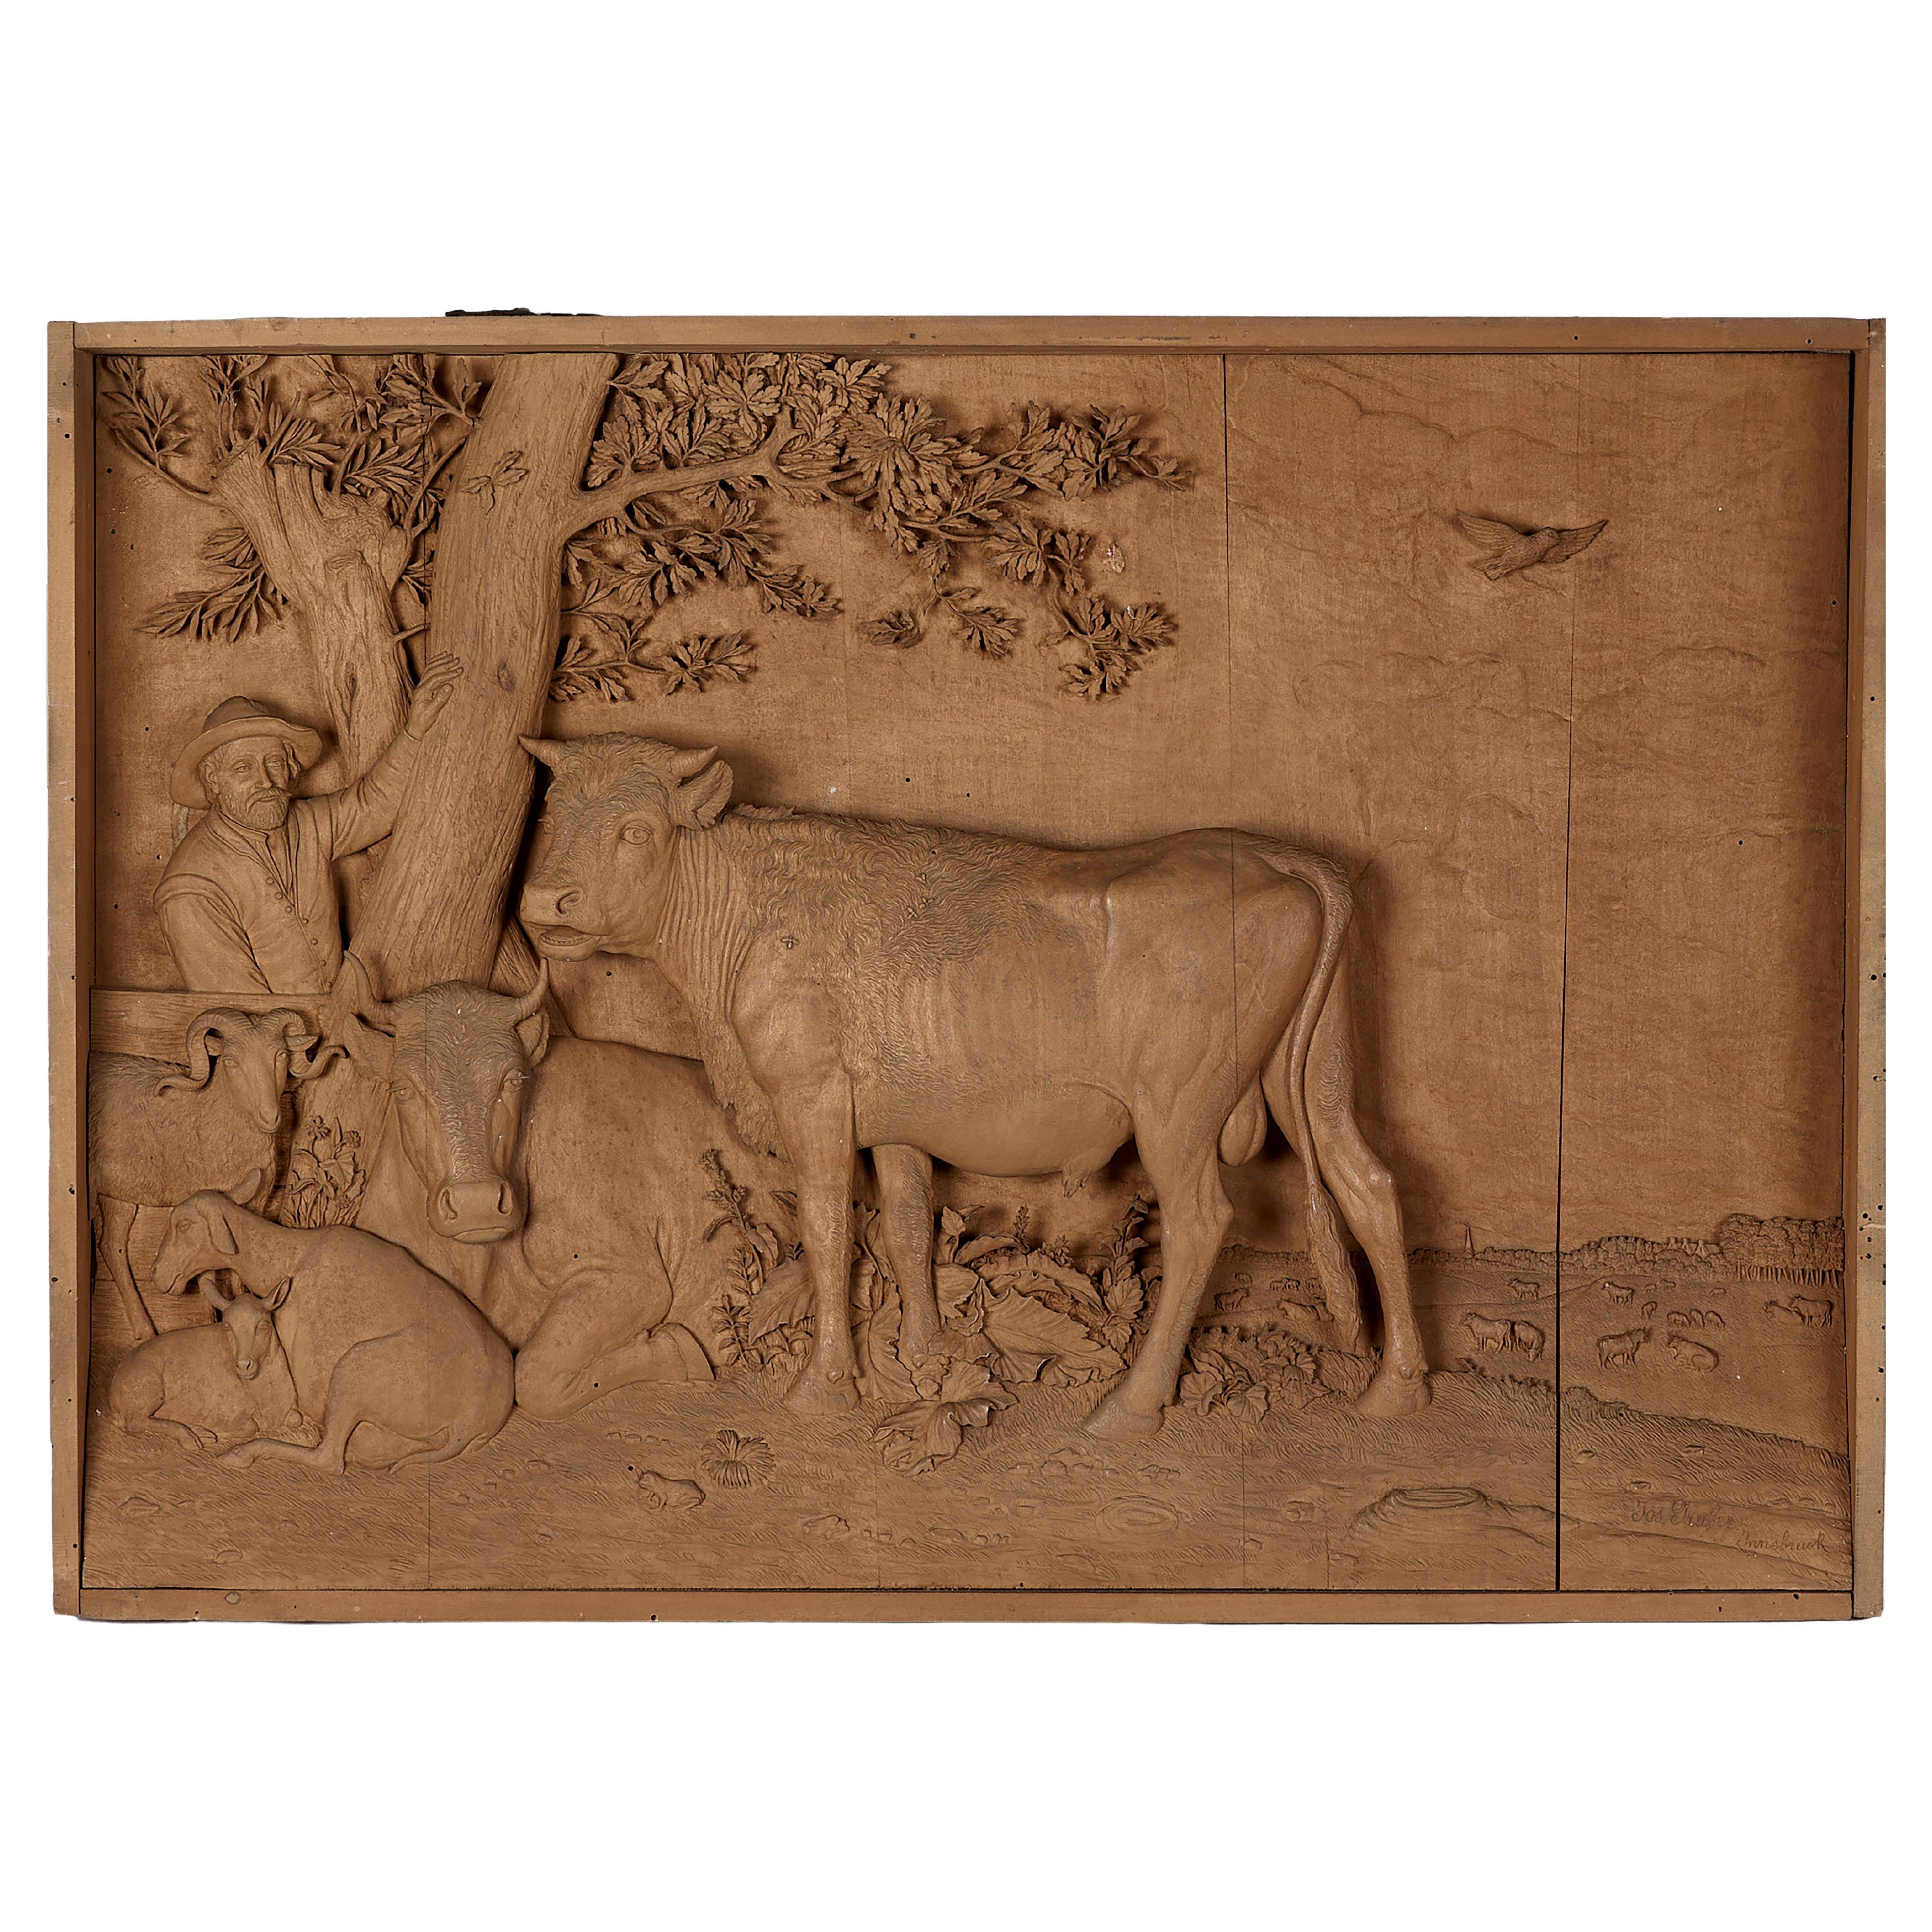 Black forest limewood carved panel depicting cattle